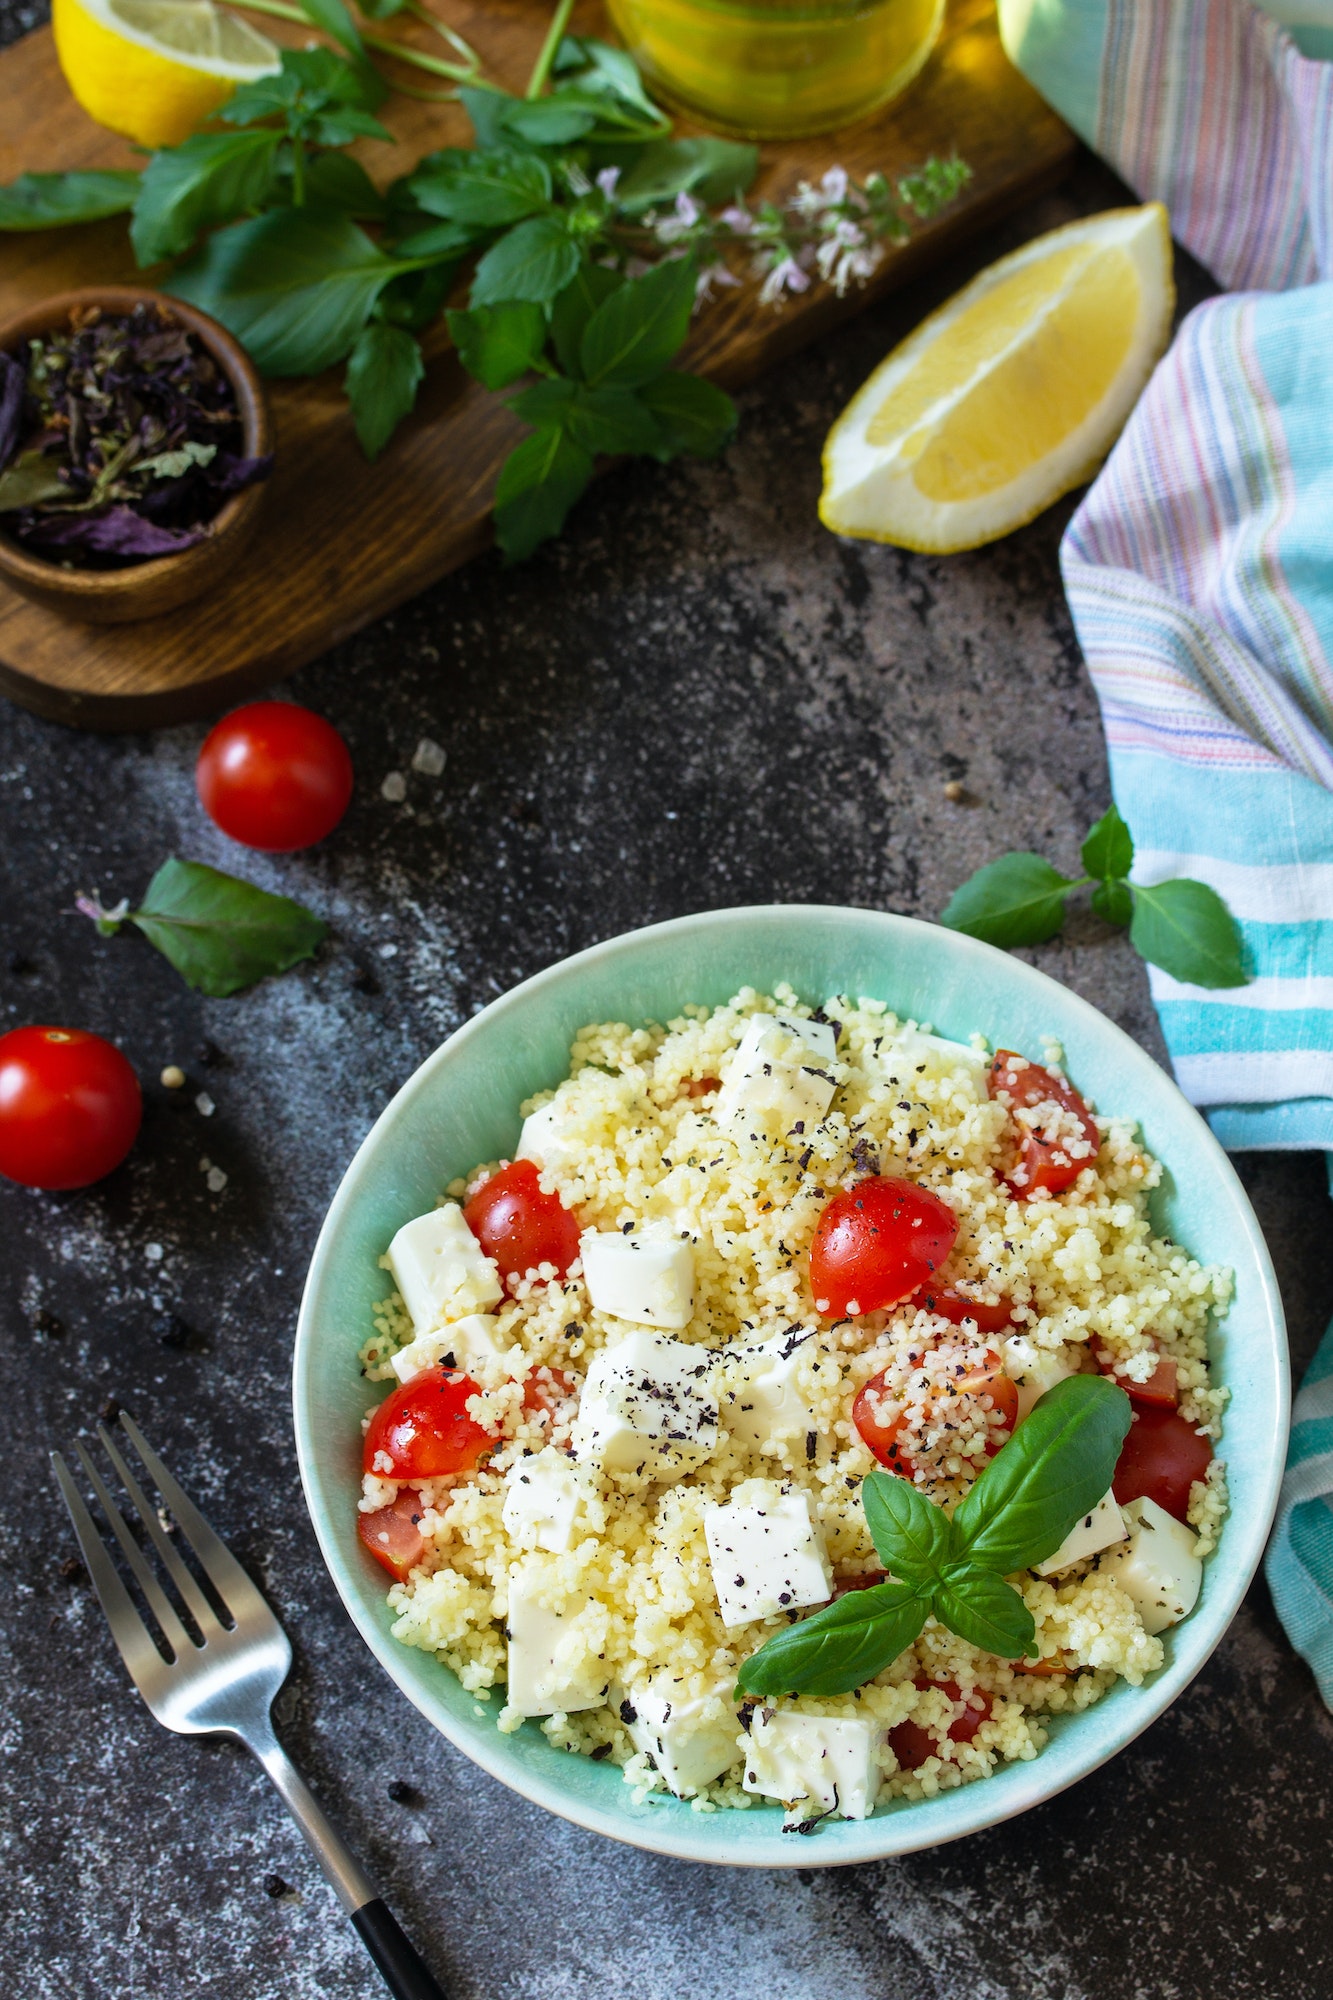 Healthy salad with couscous, tomatoes, feta cheese, basil, chili pepper and olive oil.